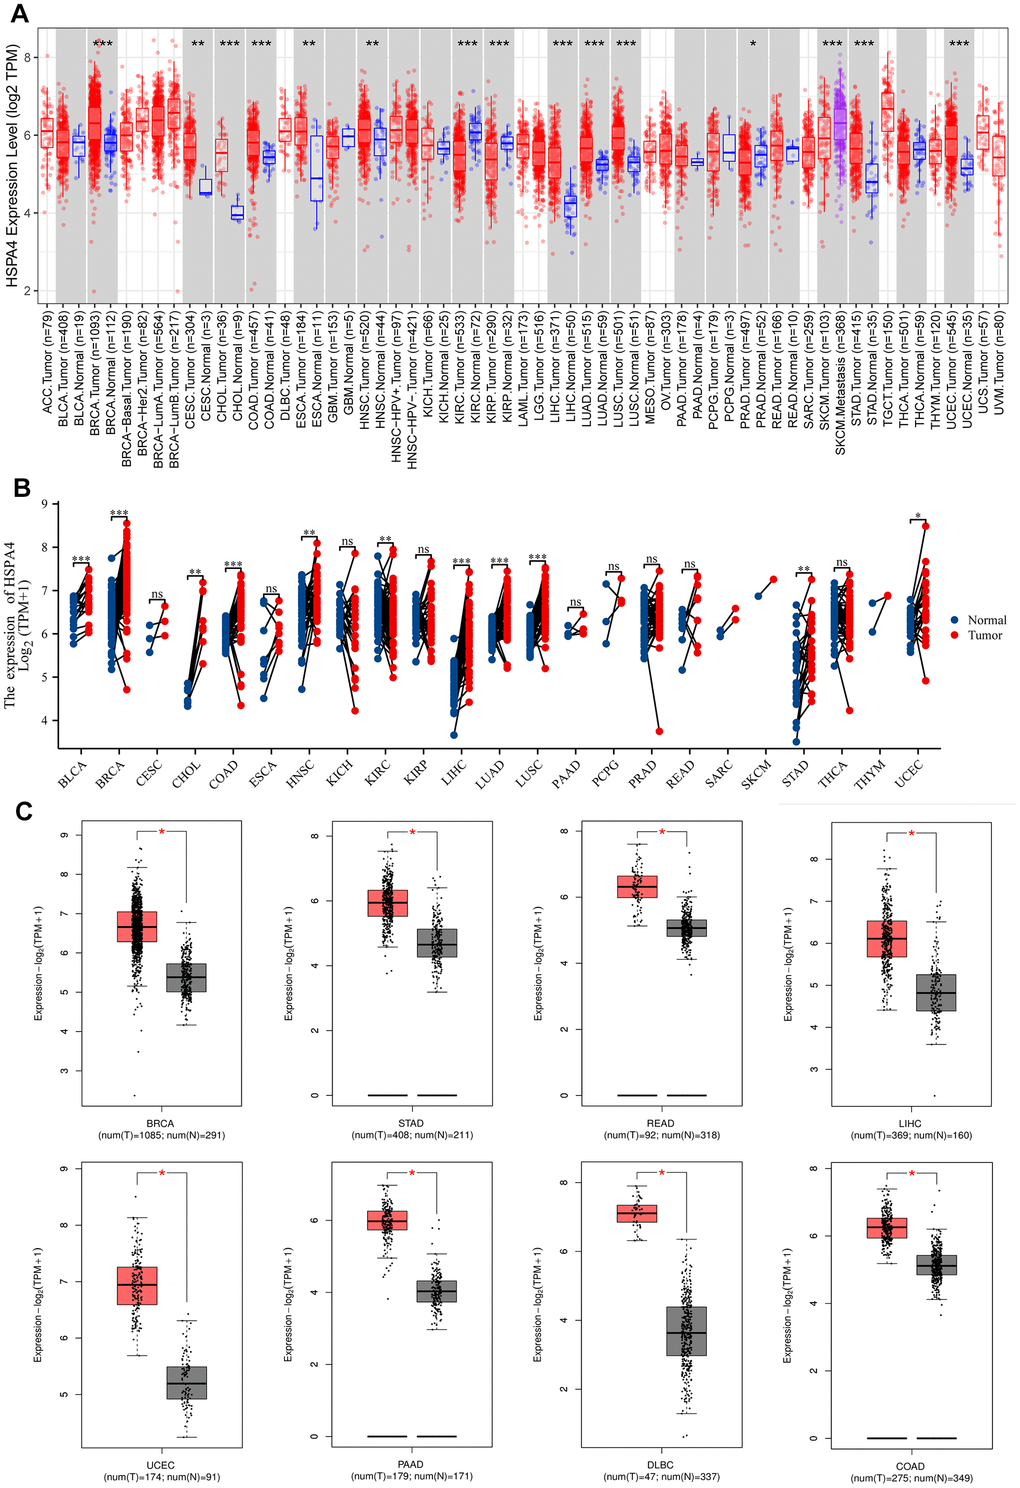 Differential expression analysis of HSPA4. (A) Expression of HSPA4 mRNA in pan-cancer. (B) The expression differences of HSPA4 in tumor and corresponding adjacent tissues were compared with paired analysis. Mann-Whitney U test was used for this analysis, ns, p≥0.05; *pC) Differential expression analysis of HSPA4 in BRCA, STAD, READ, LIHC, UCEC, PAAD, DLBC and COAD.